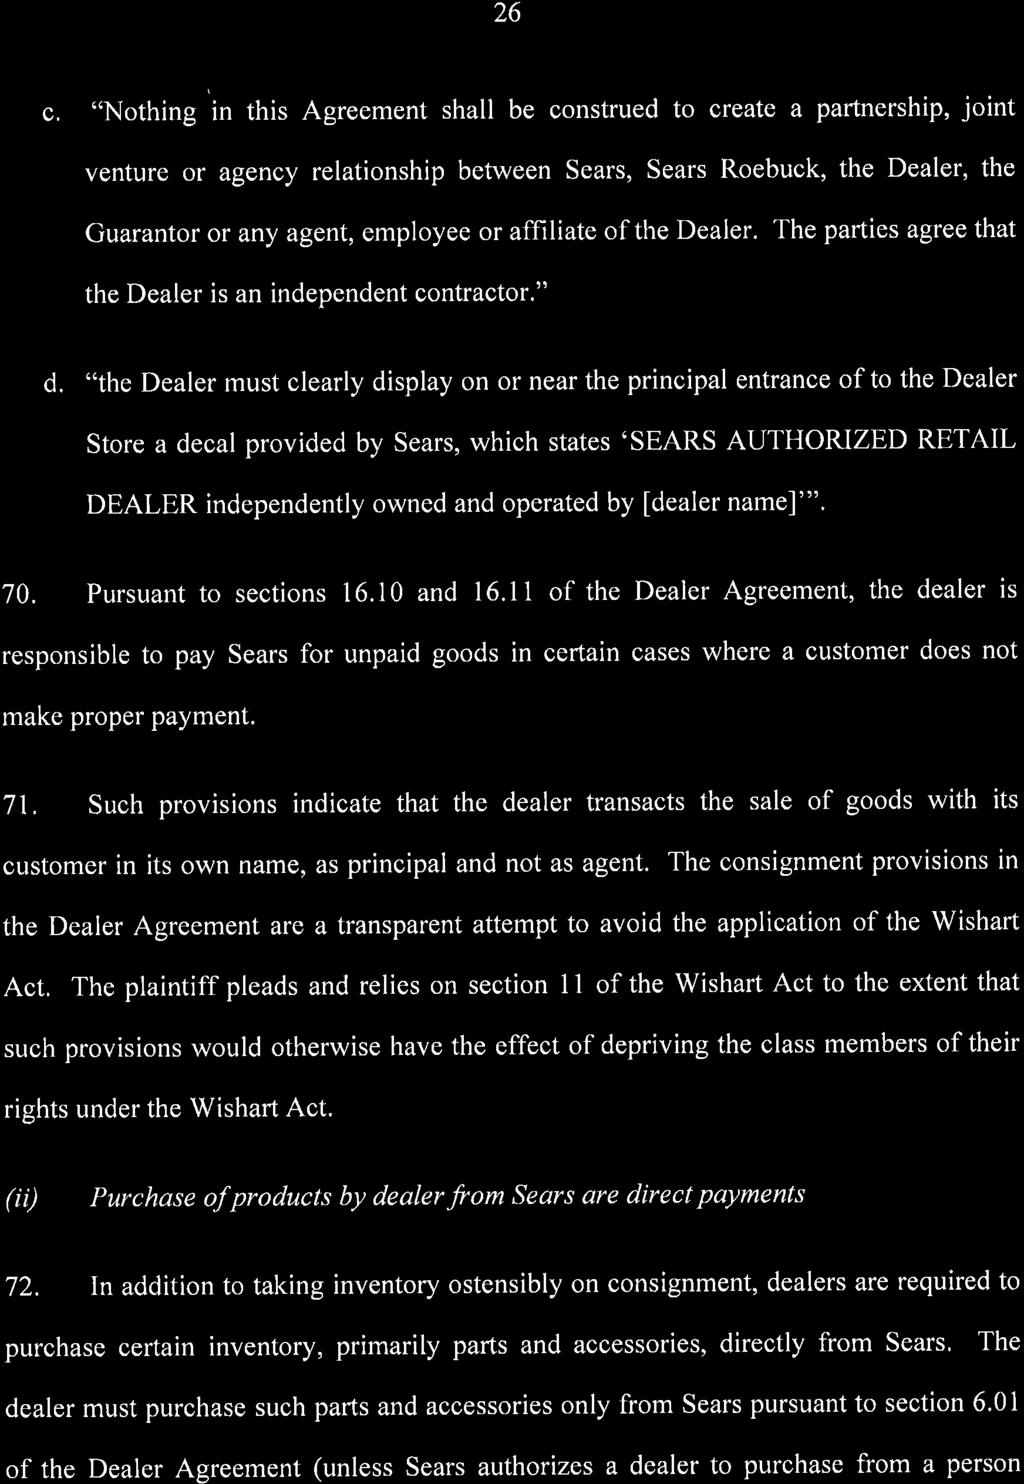 26 c, "Nothing in this Agreement shall be construed to create a partnership, joint venture or agency relationship between Sears, Sears Roebuck, the Dealer, the Guarantor or any agent, employee or